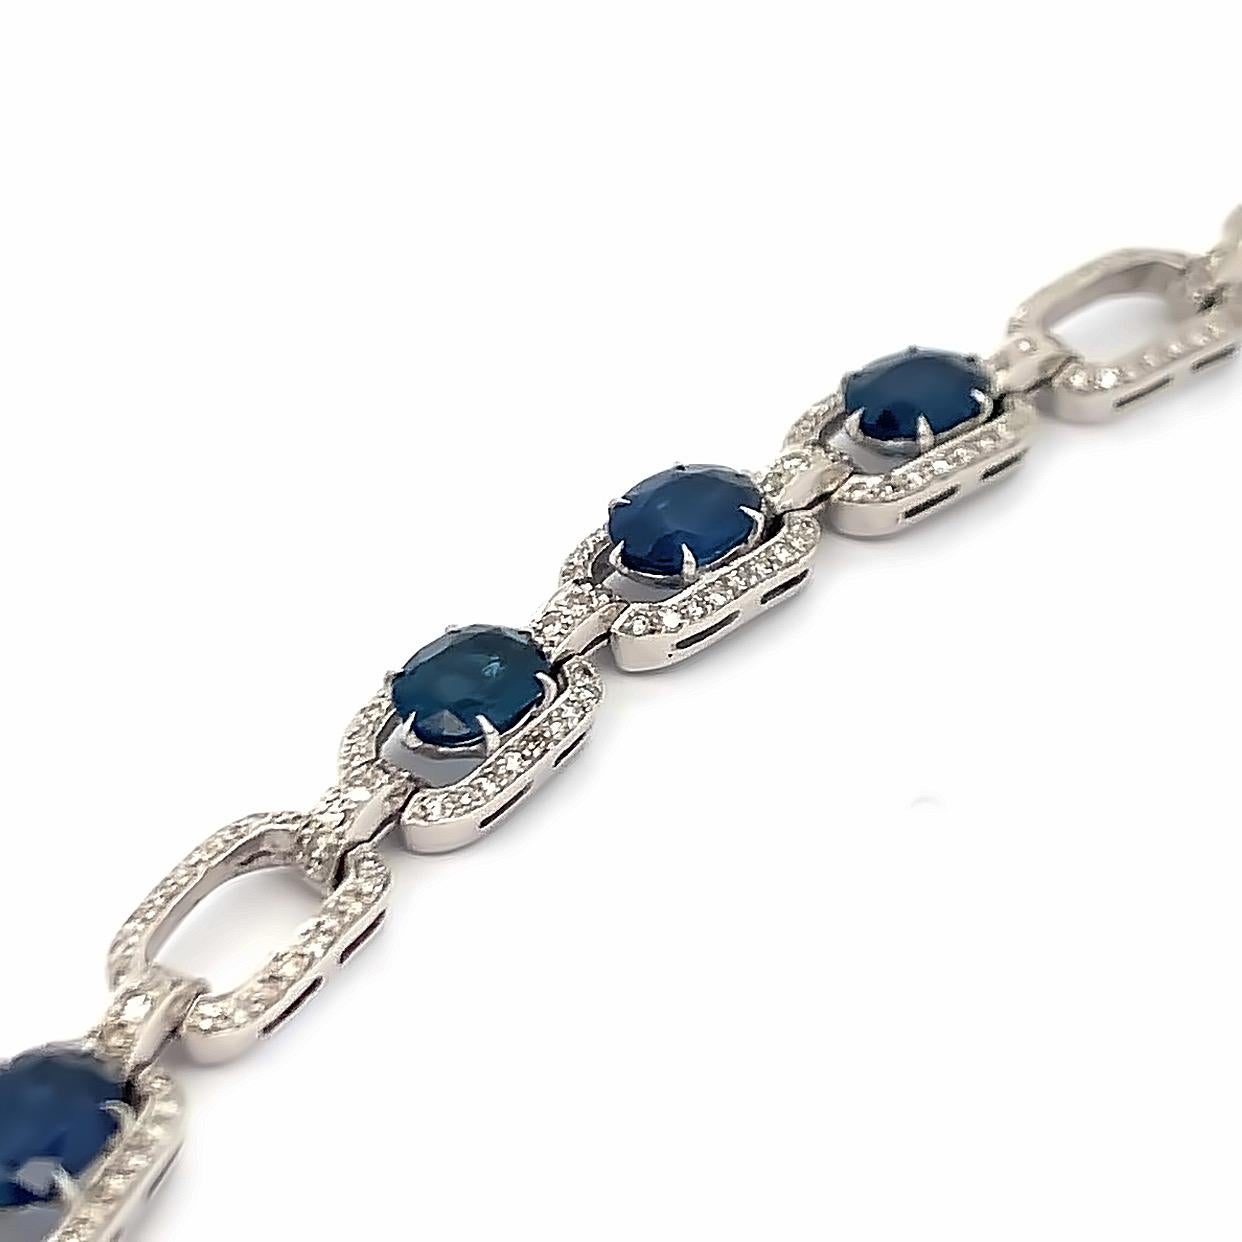 Sapphire and Diamond Link Bracelet

A white gold link bracelet adorned with oval and square cut sapphires and round cut diamonds. 

Approximate Sapphire Weights: 13.50 Carats
Approximate Diamond Weights: 3 Carats 
Approximate Length: 7.75